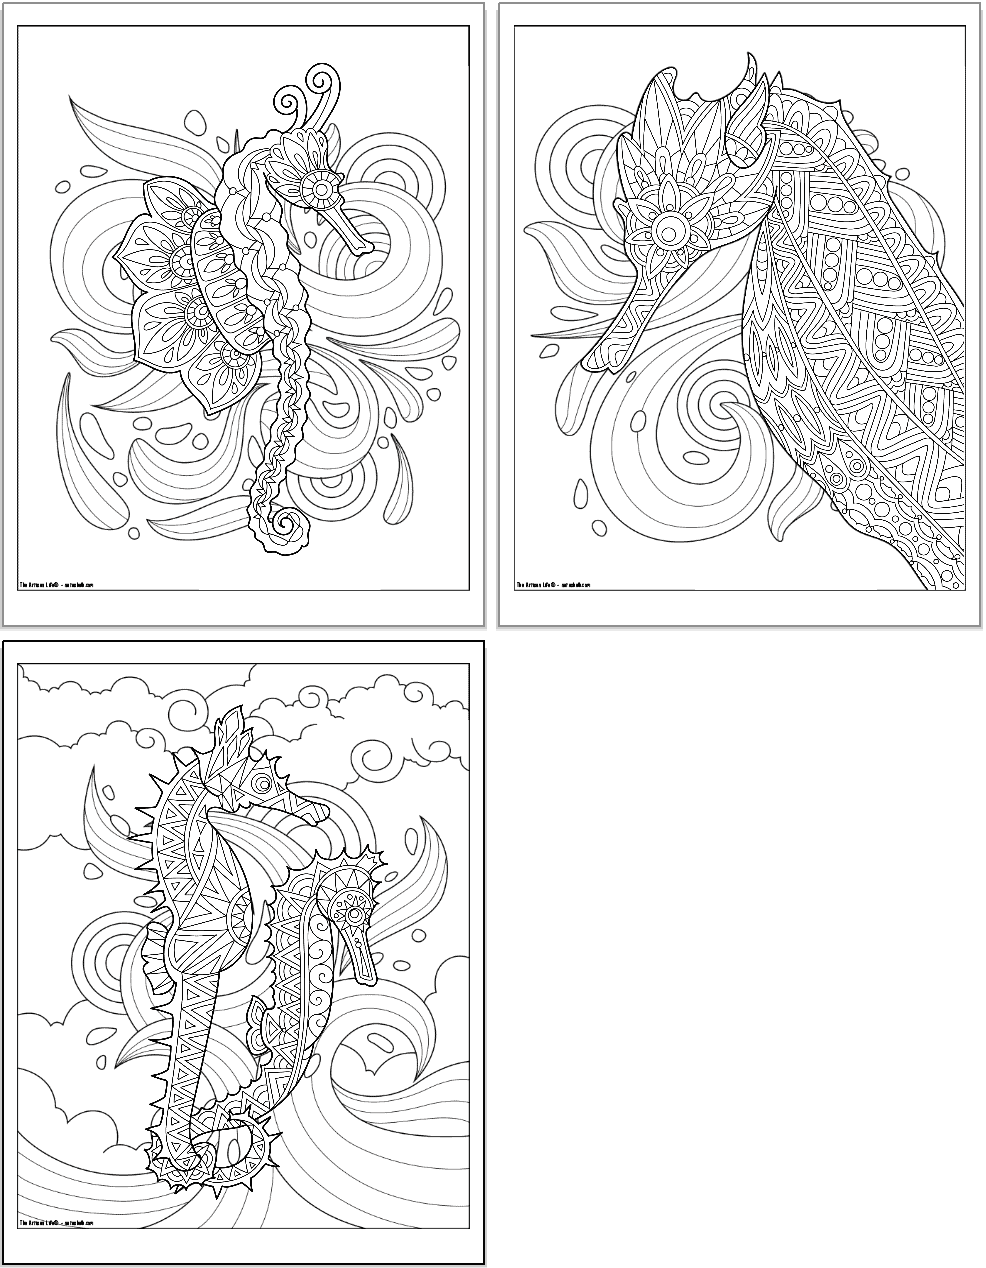 welcome-to-dover-publications-ch-magnificent-mermaids-mermaid-coloring